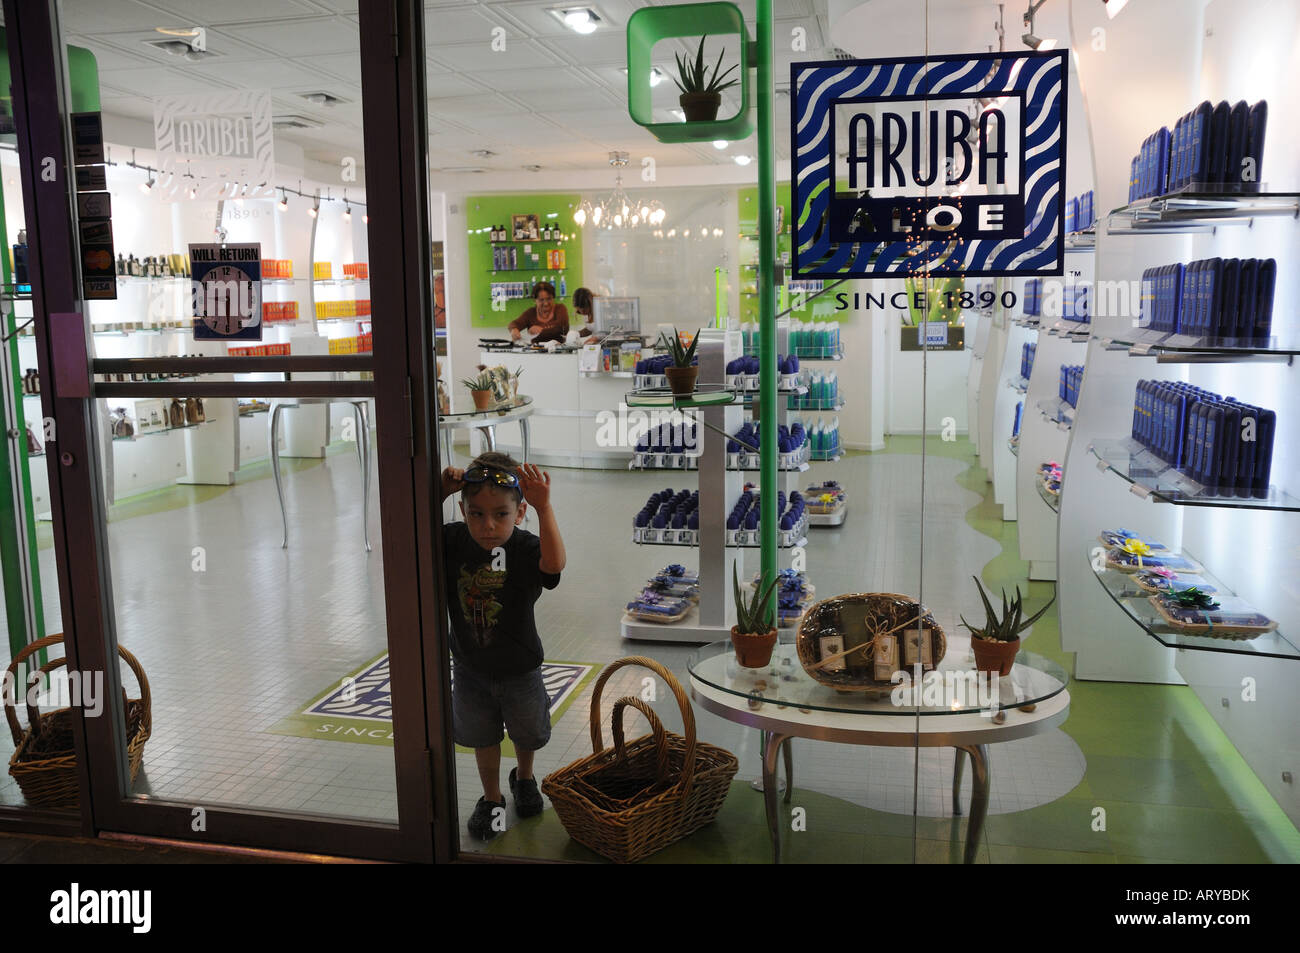 A shop in Aruba selling aloe, which has been grown in Aruba for more than a century and has many cosmetic and medicinal uses. Stock Photo